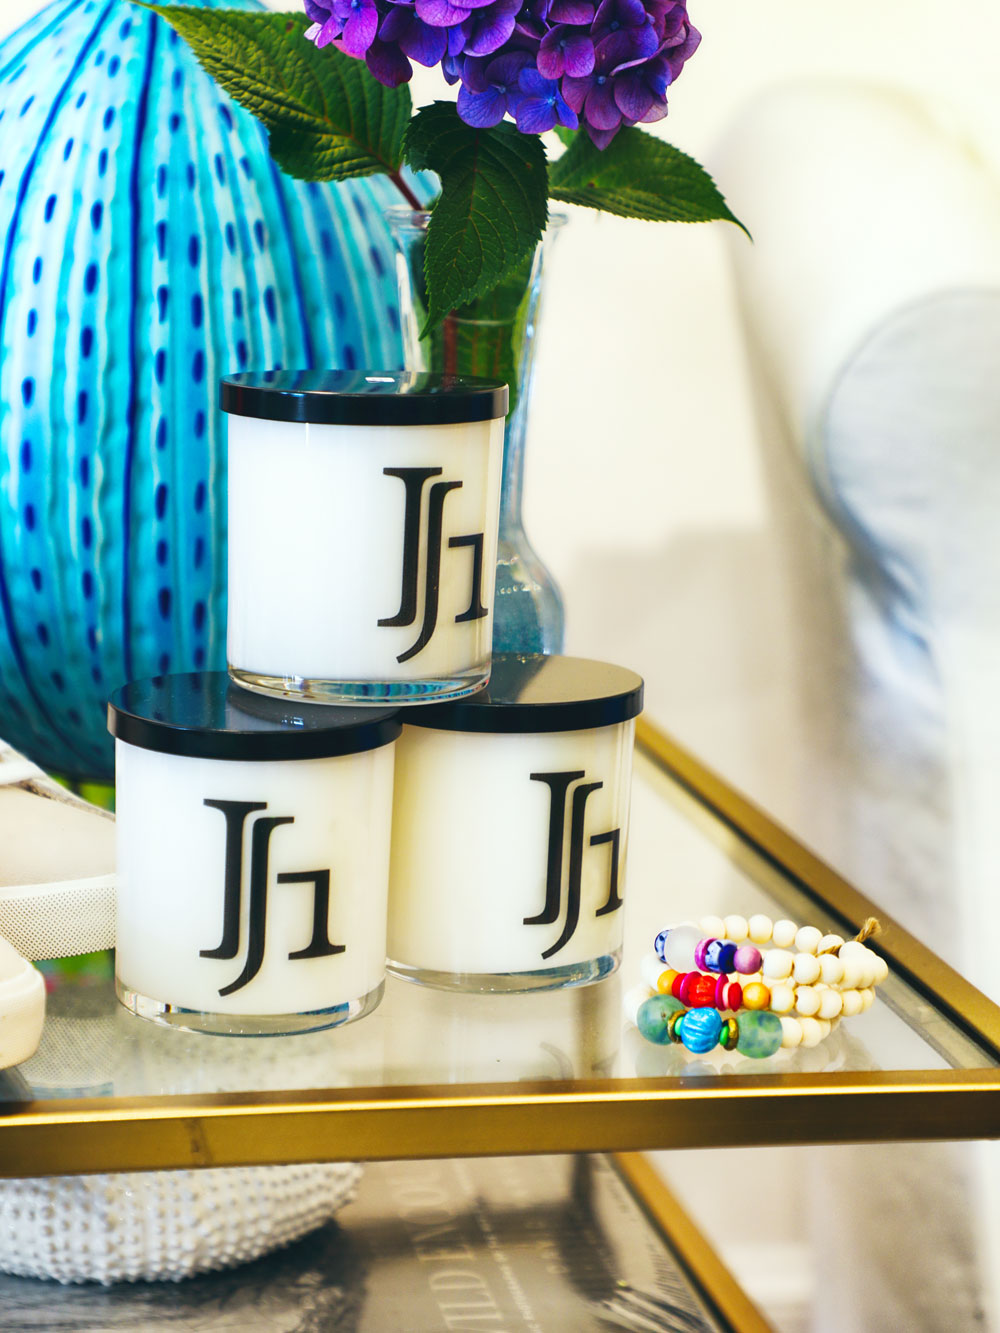 The Custom JH Candle | Watch Hill Scent